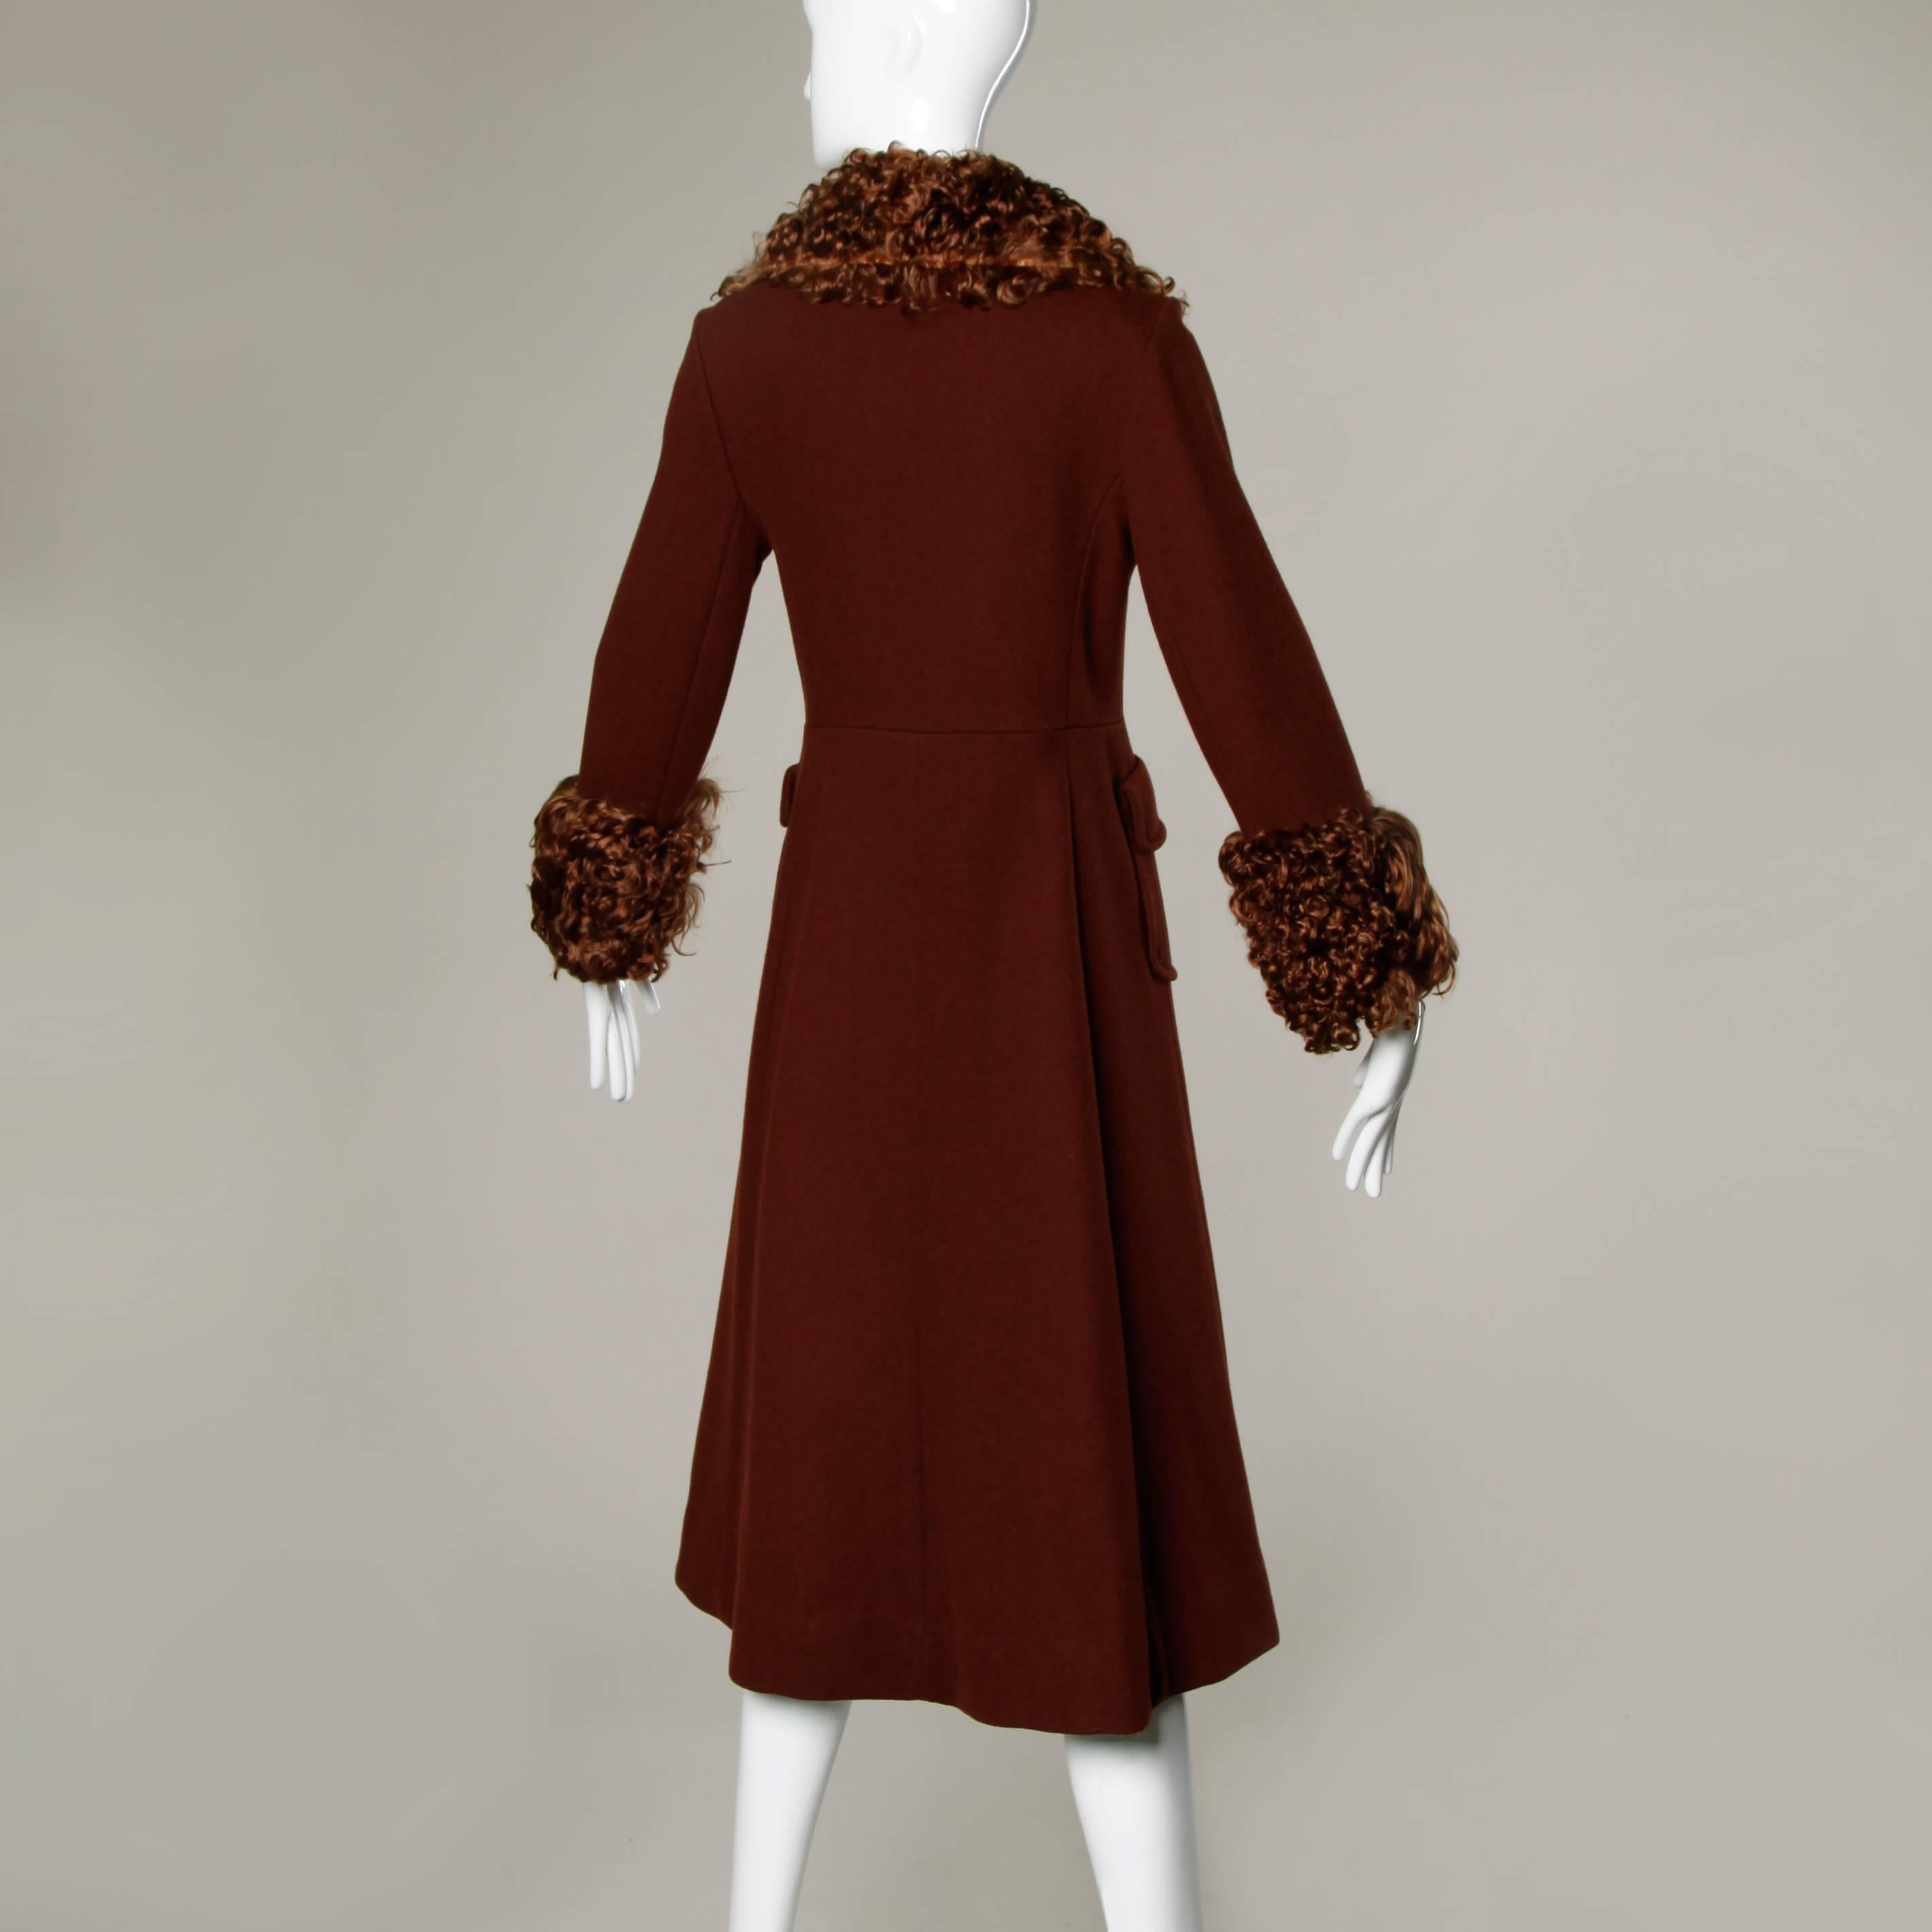 Women's 1970s Vintage Brown Wool Princess Coat with Mongolian Lamb Fur Collar and Cuffs